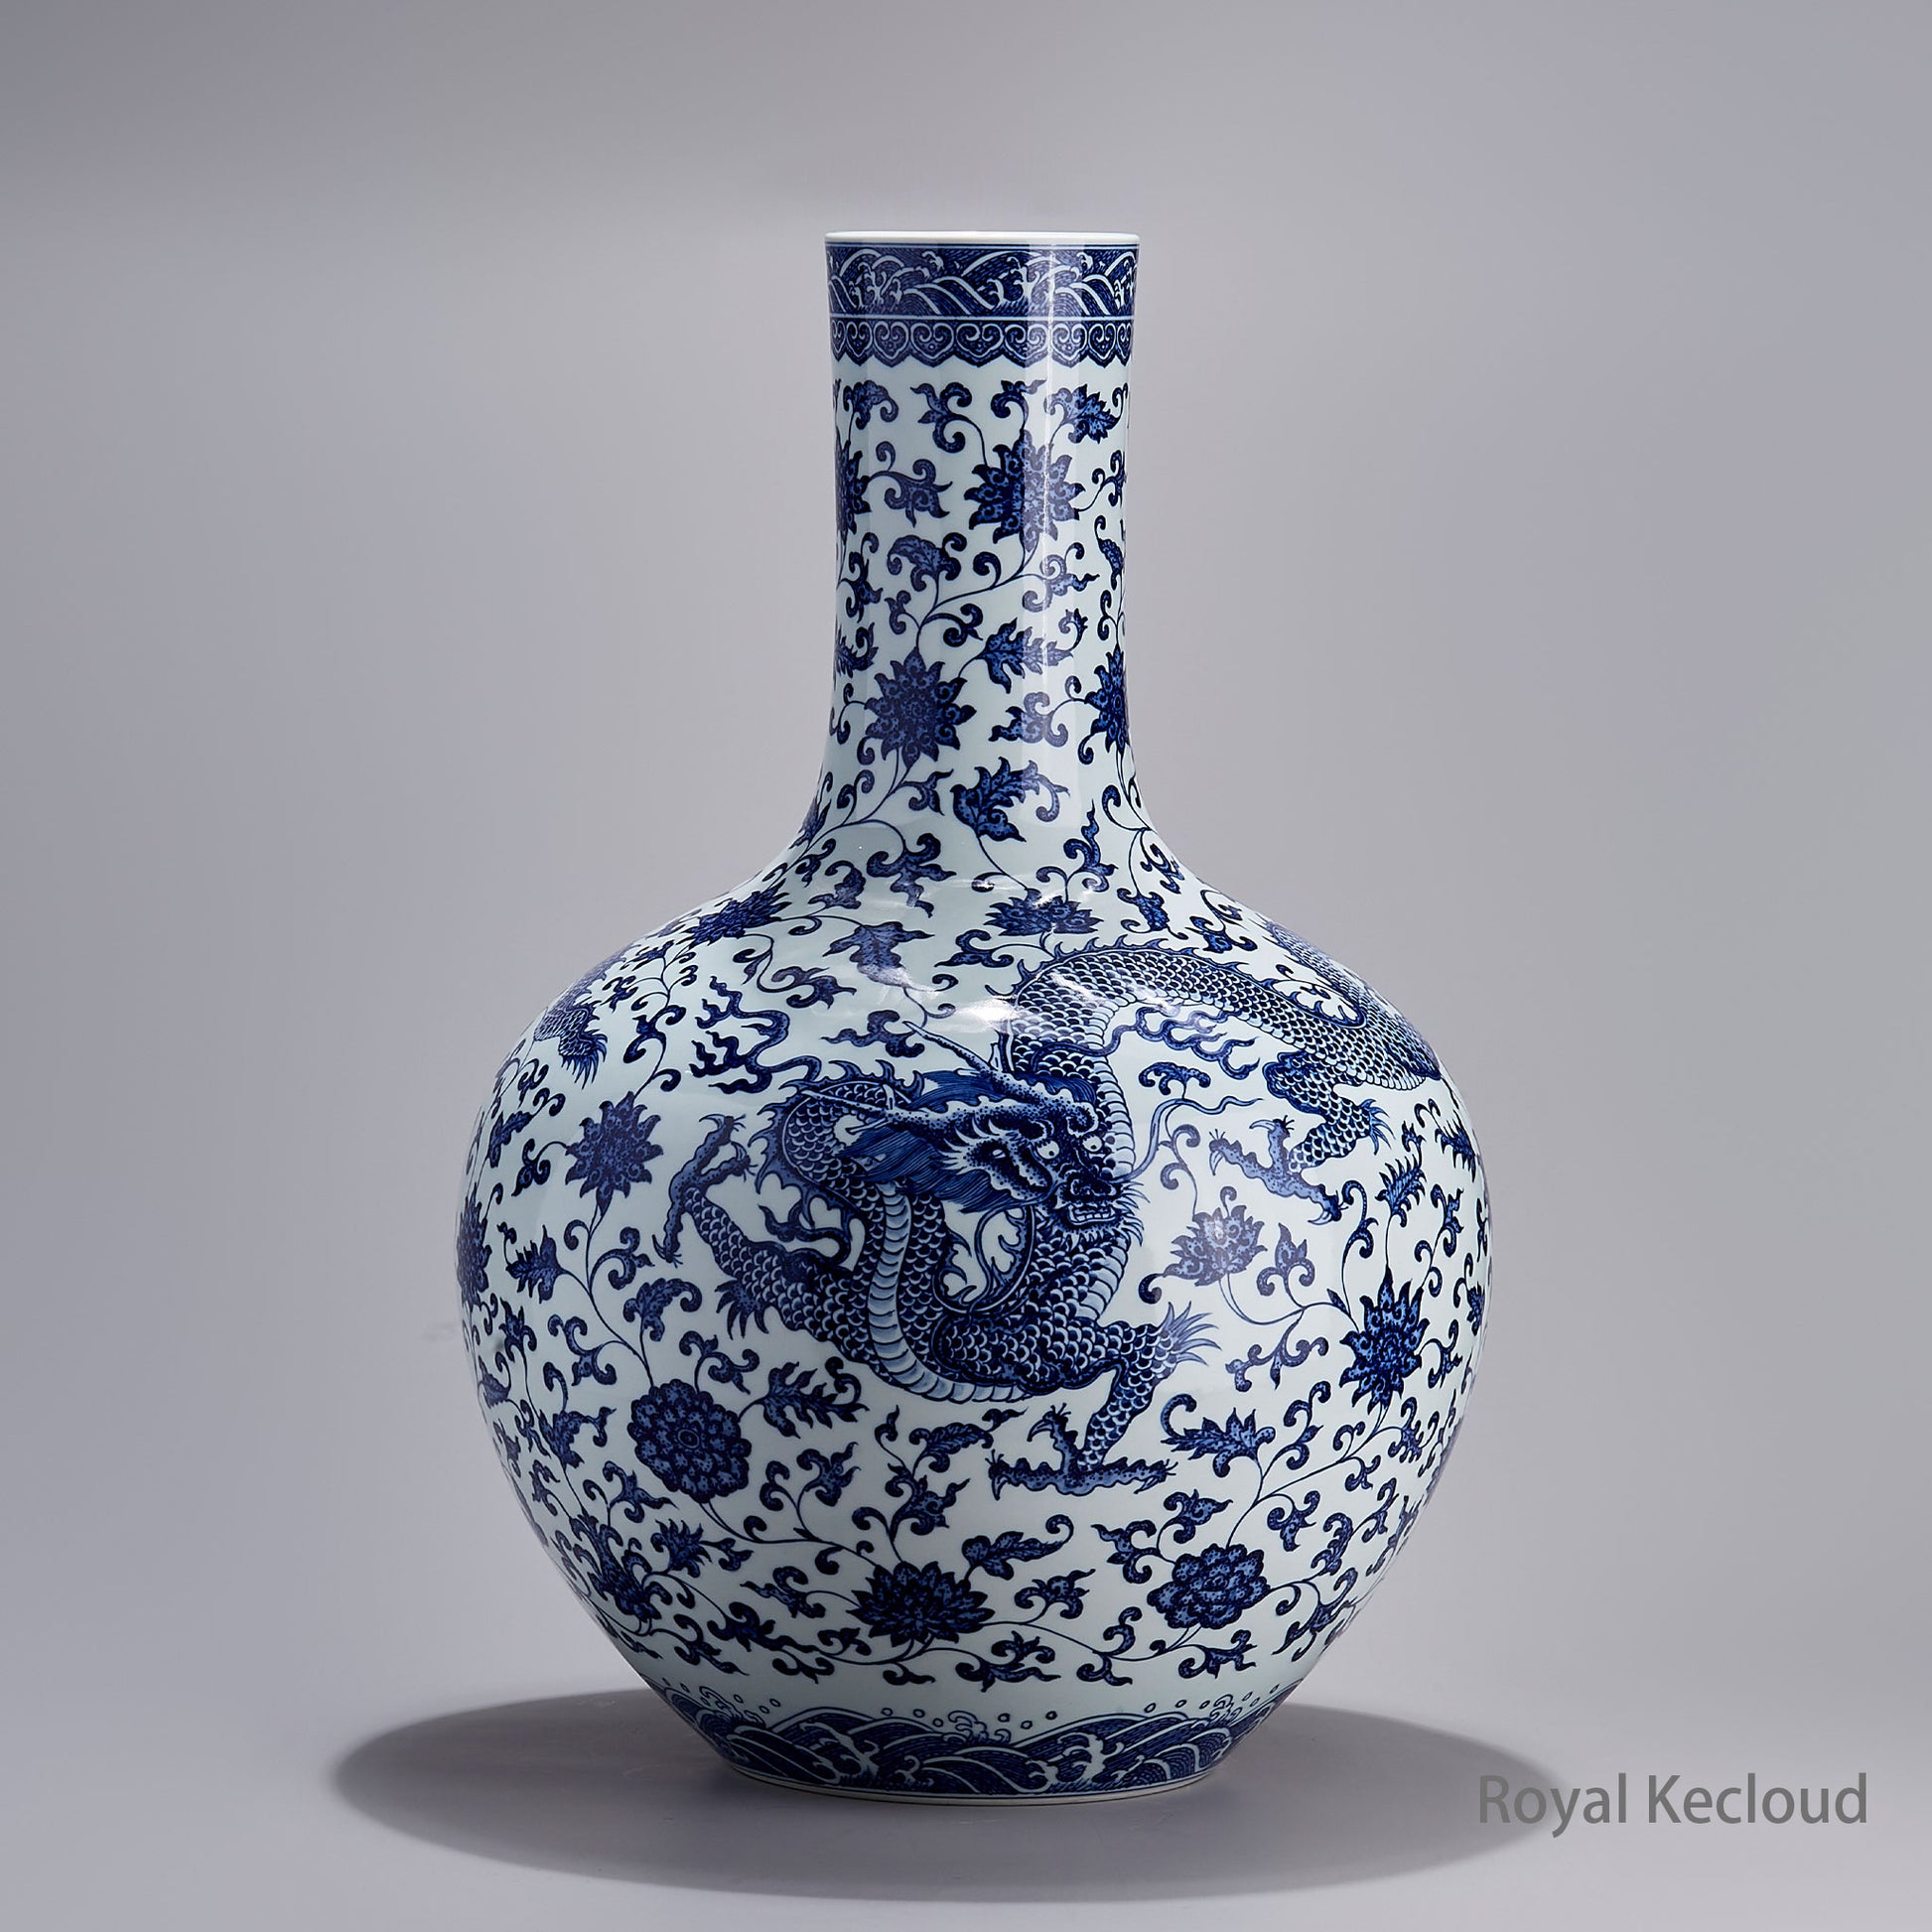 Jingdezhen Handmade Blue-and-white Vase with the Design of Dragon Flying among Flowers